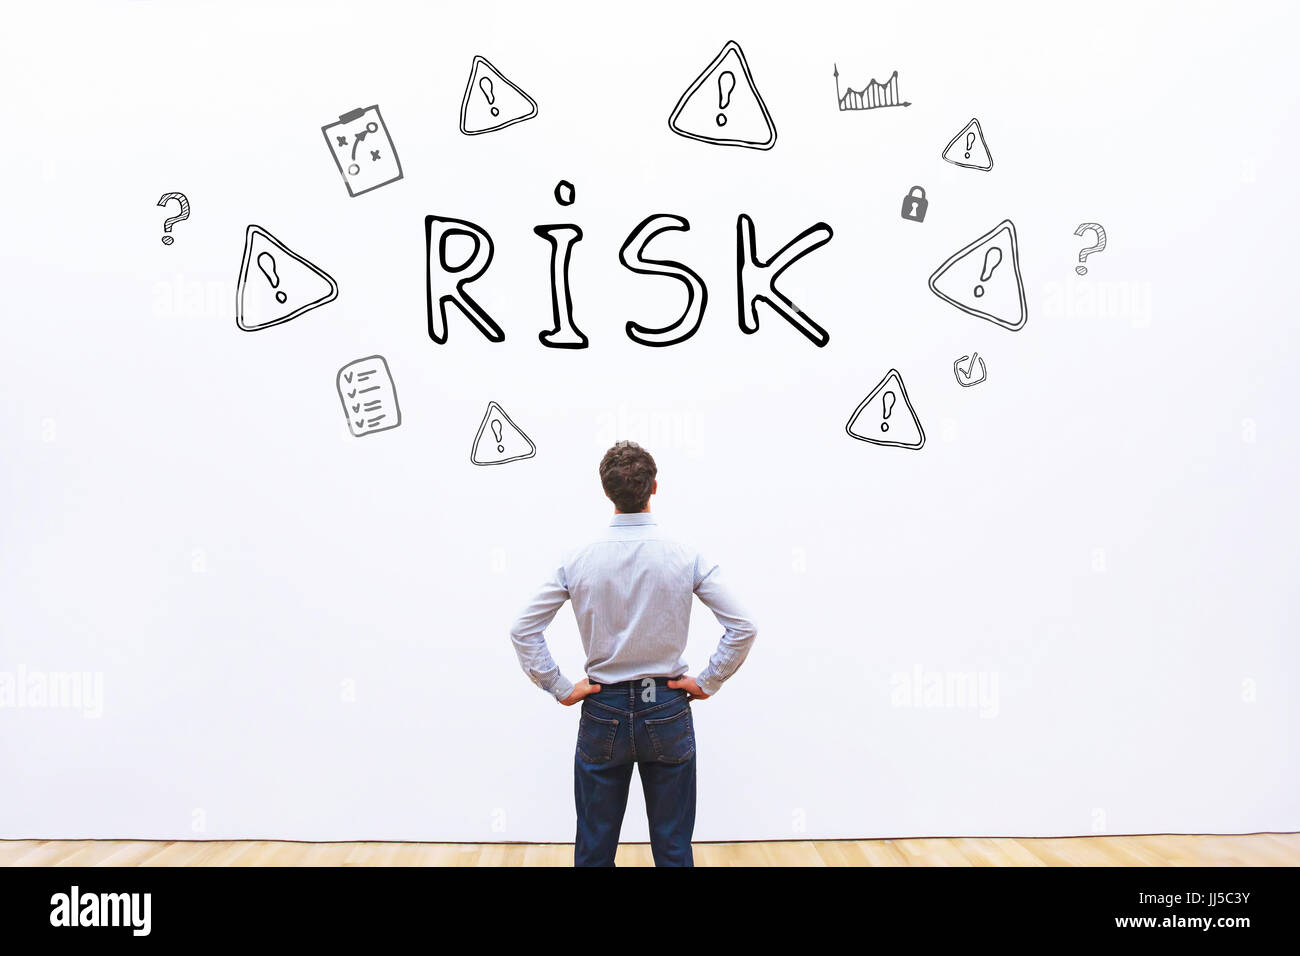 risk concept, word written on white wall background Stock Photo